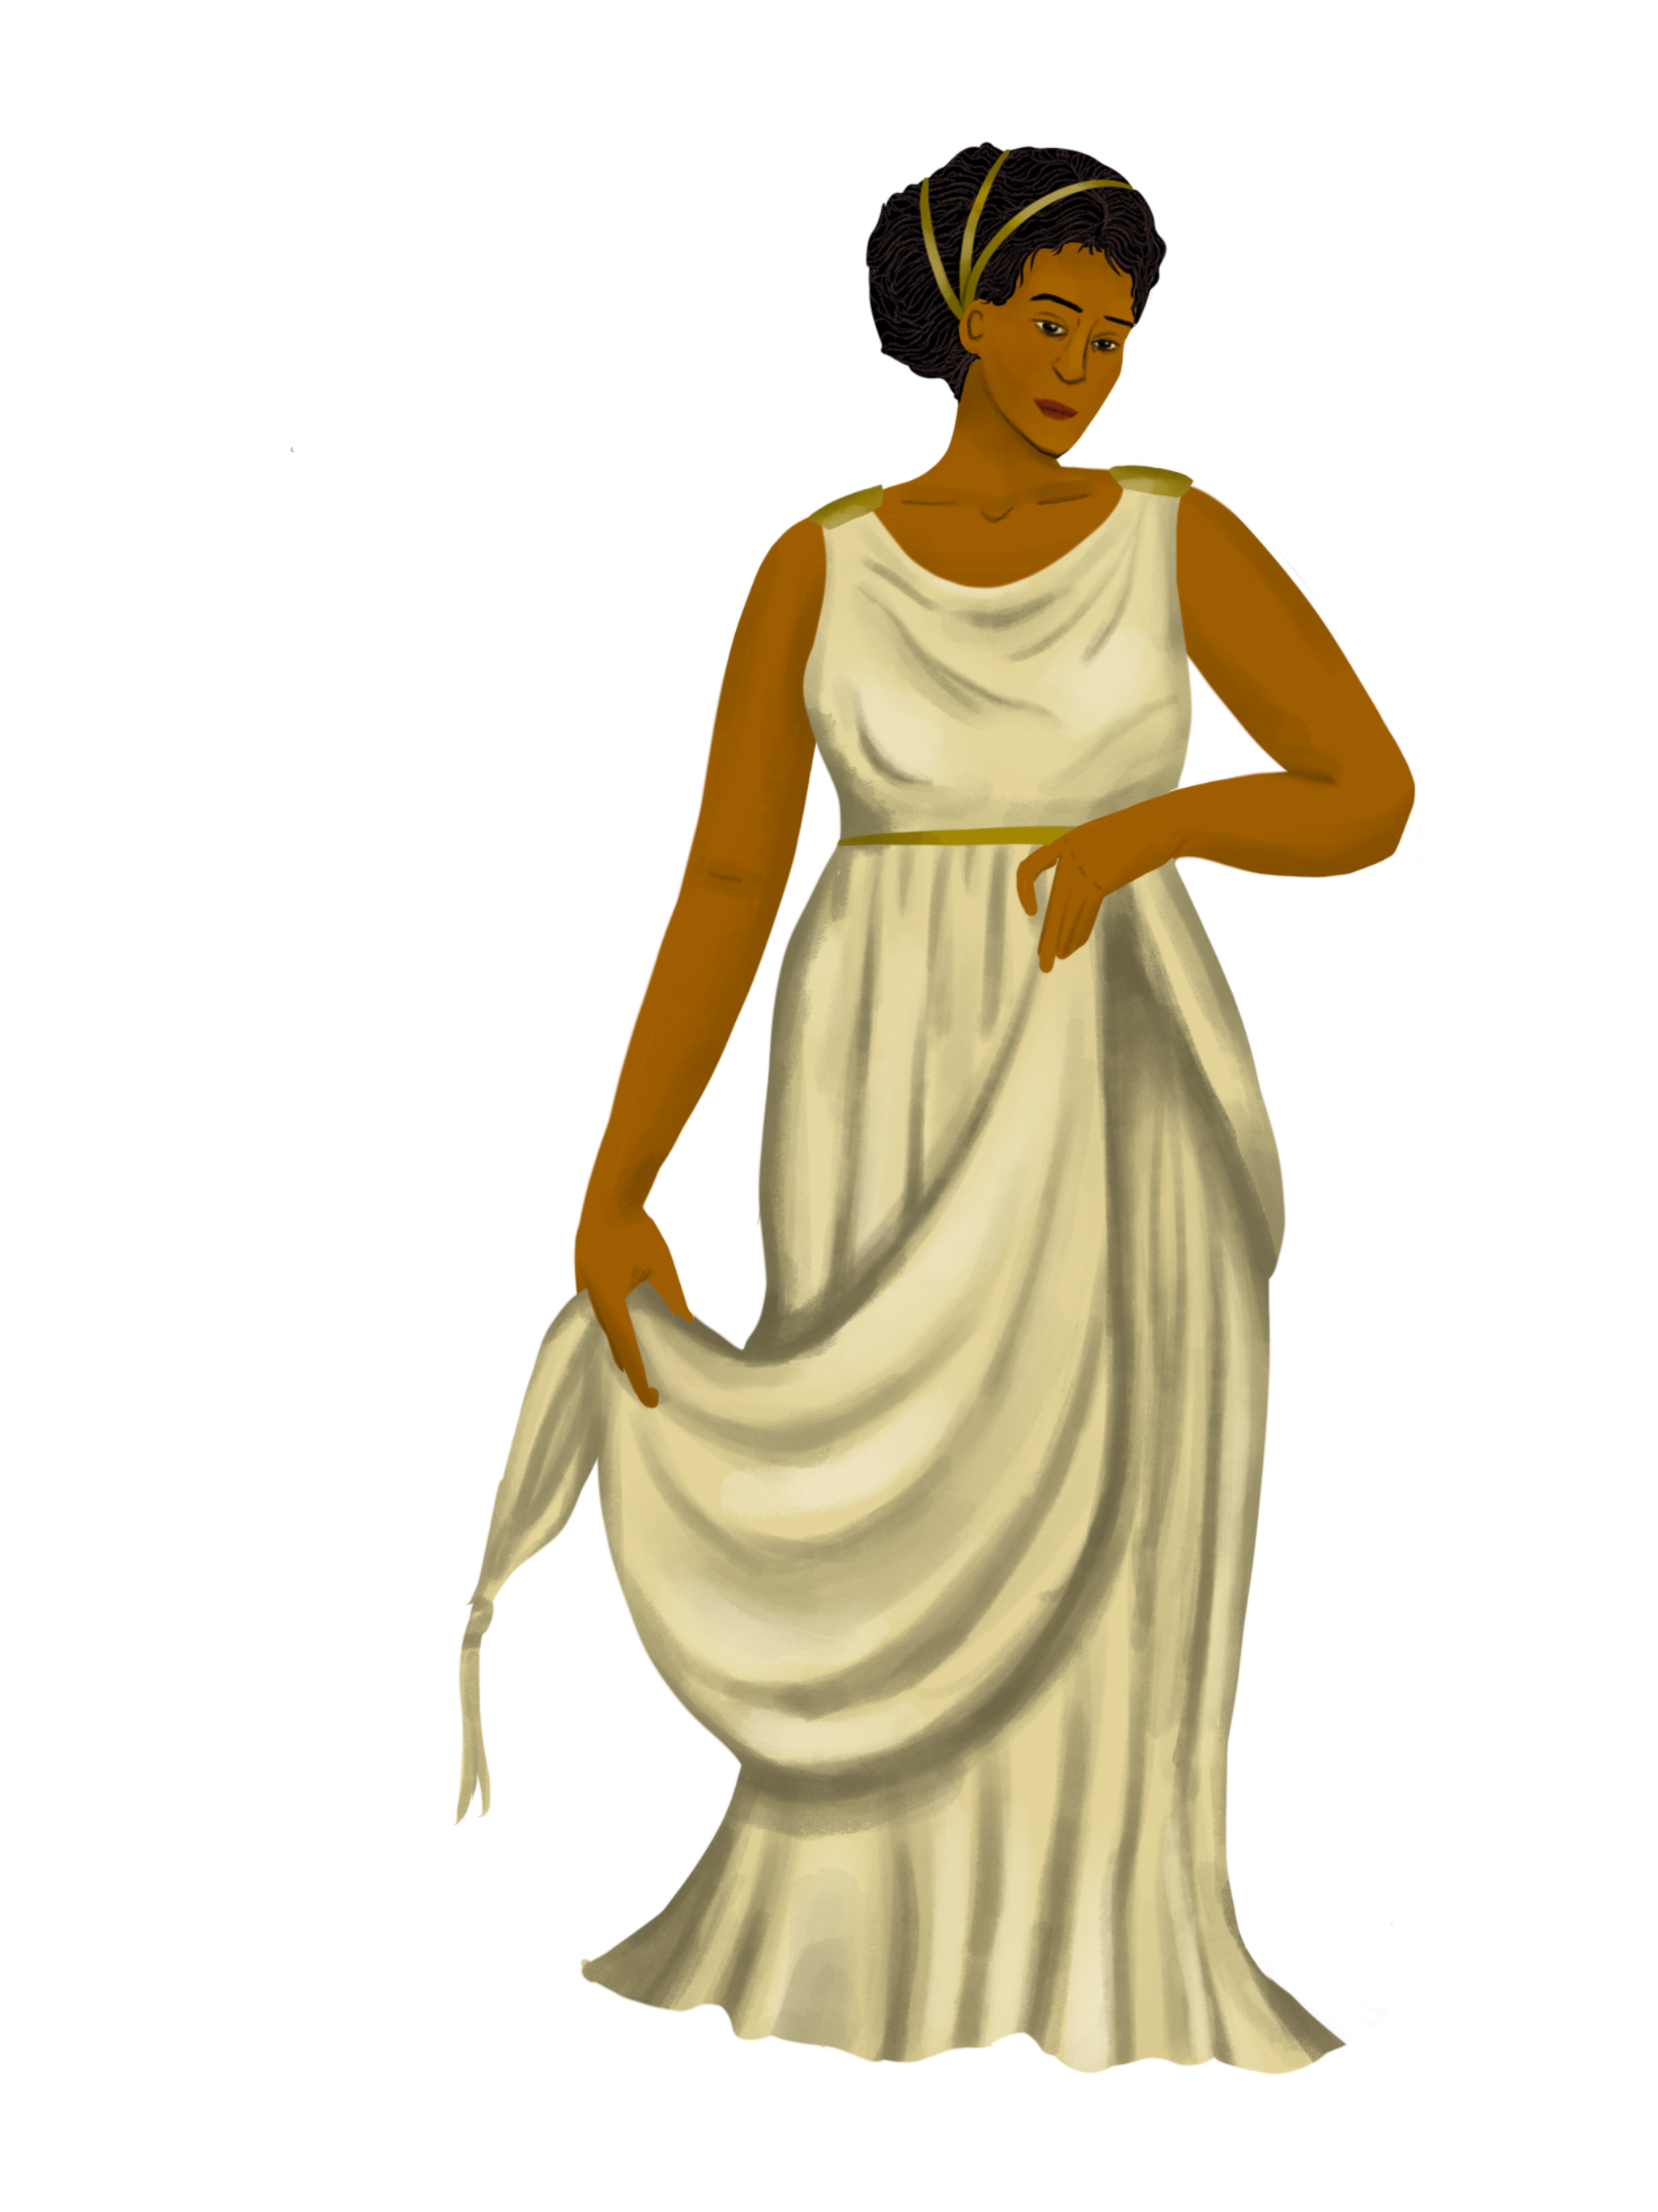 Woman resident of the game; she has dark skin and a draped gown which she is holding up daintily with her hand while looking at the viewer.